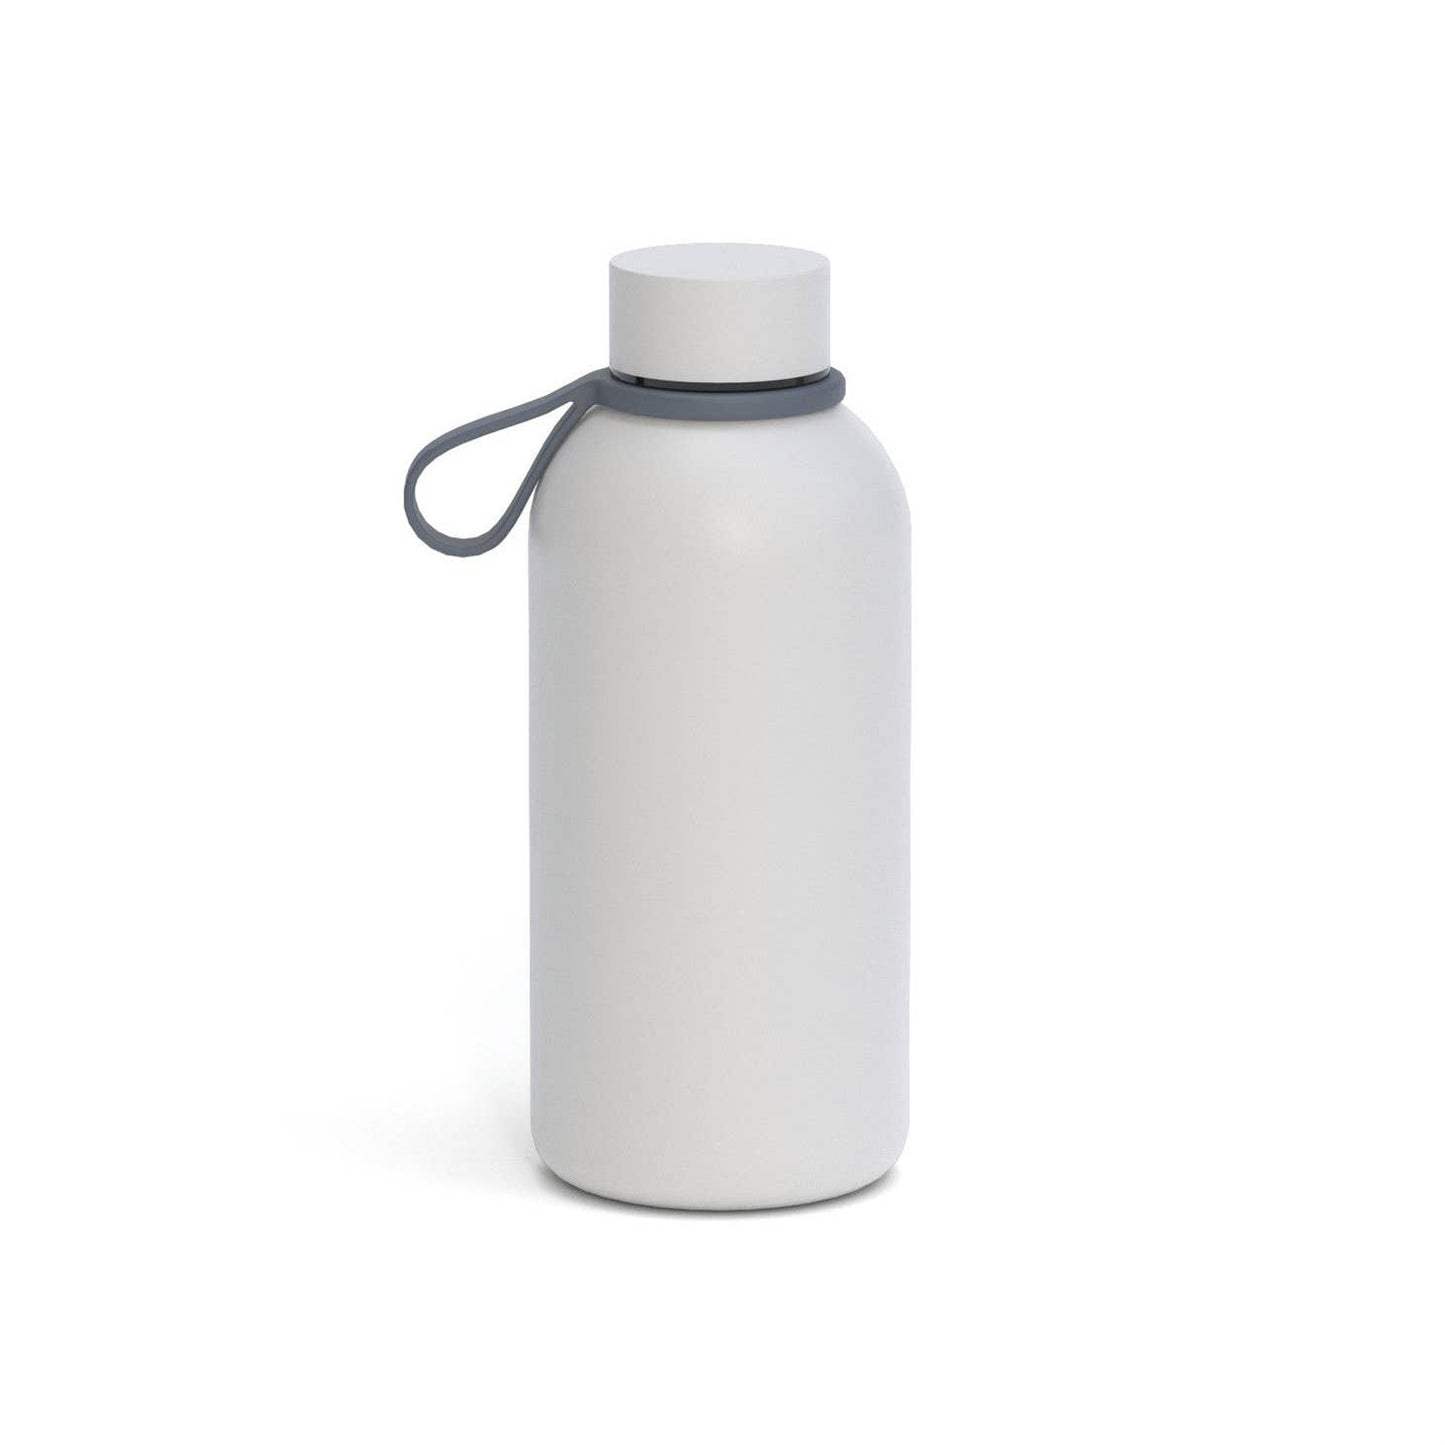 Insulated Reusable Bottle (multiple colors and sizes)